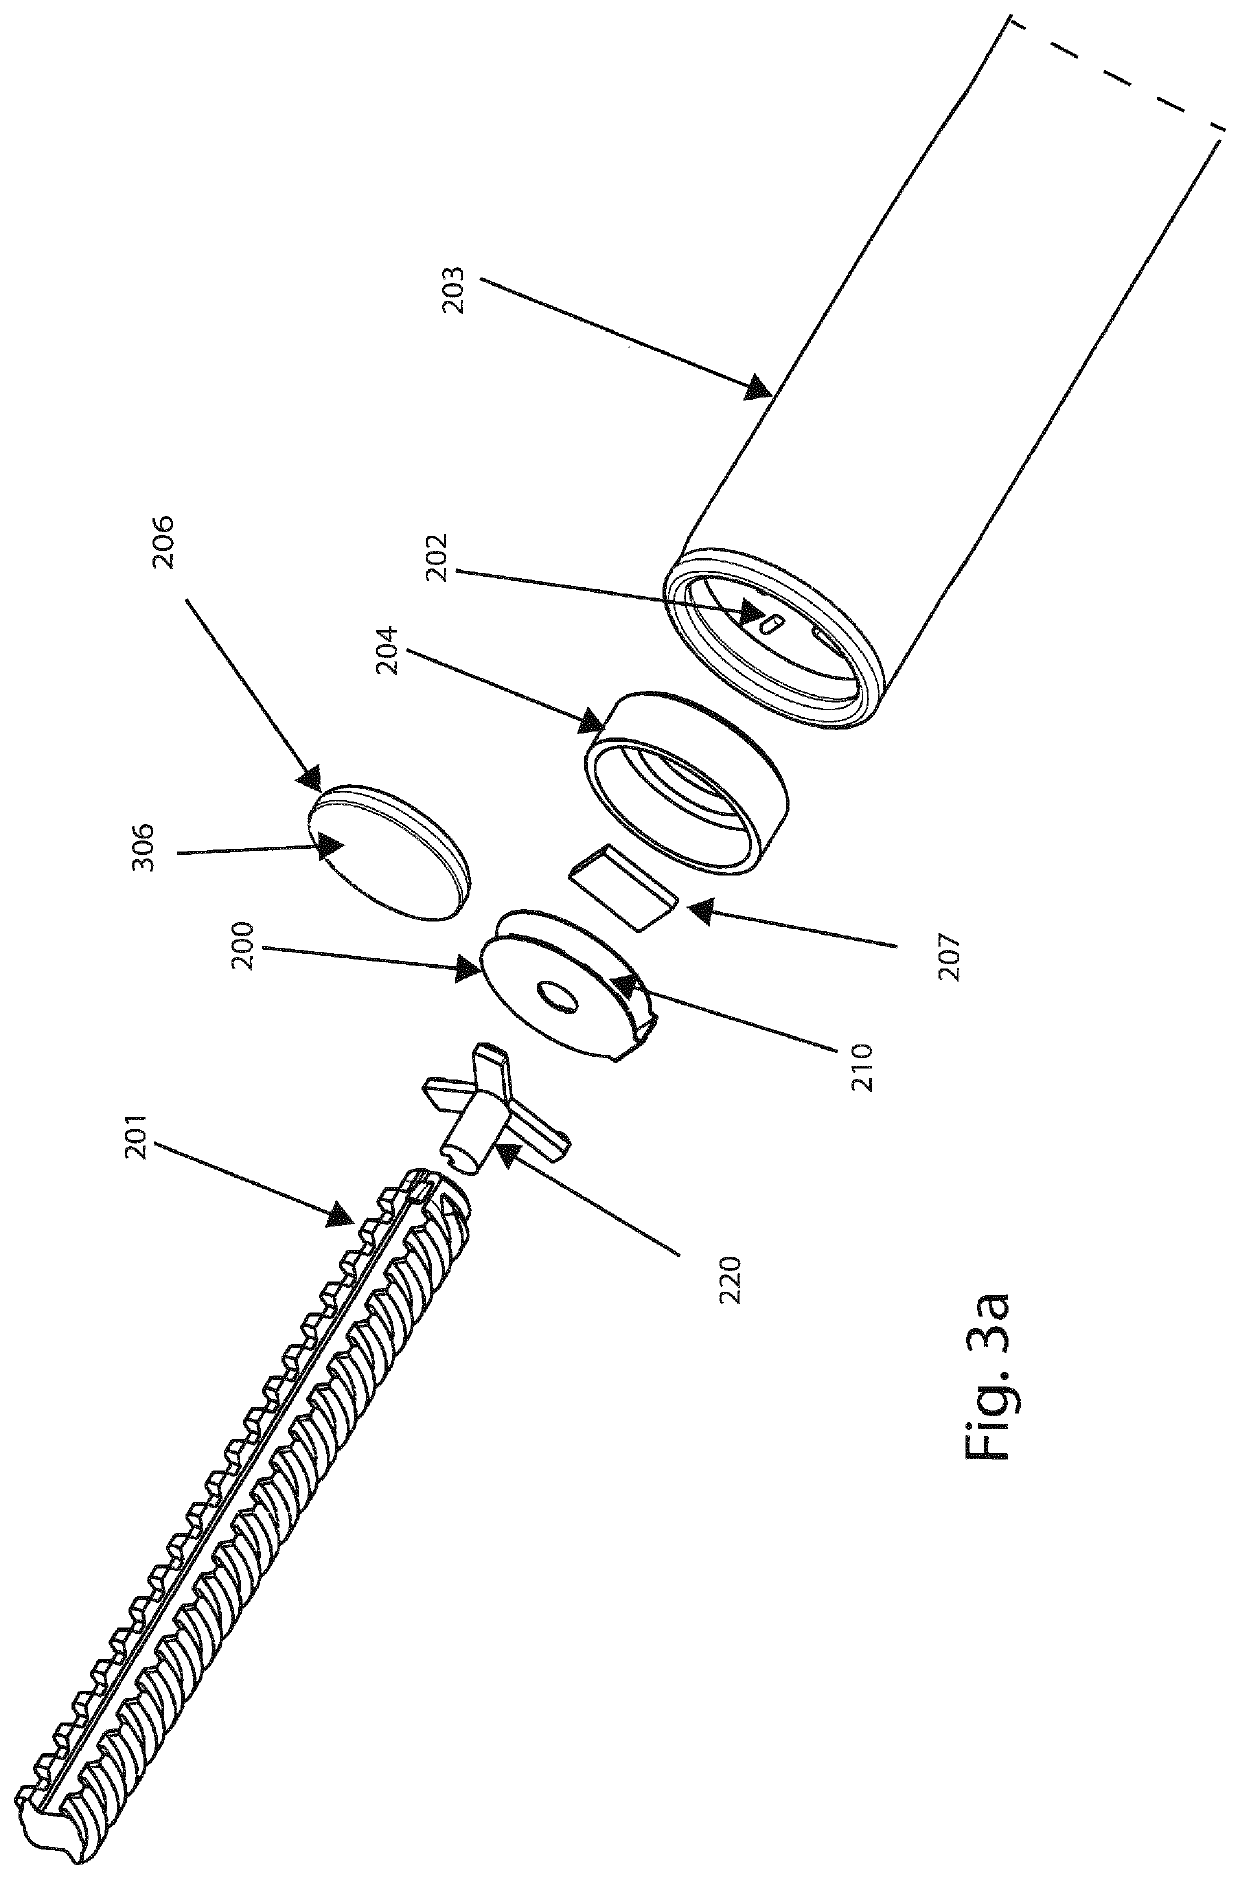 A rotary dosage sensing module for a disposable drug delivery pen and a method of assembling the same